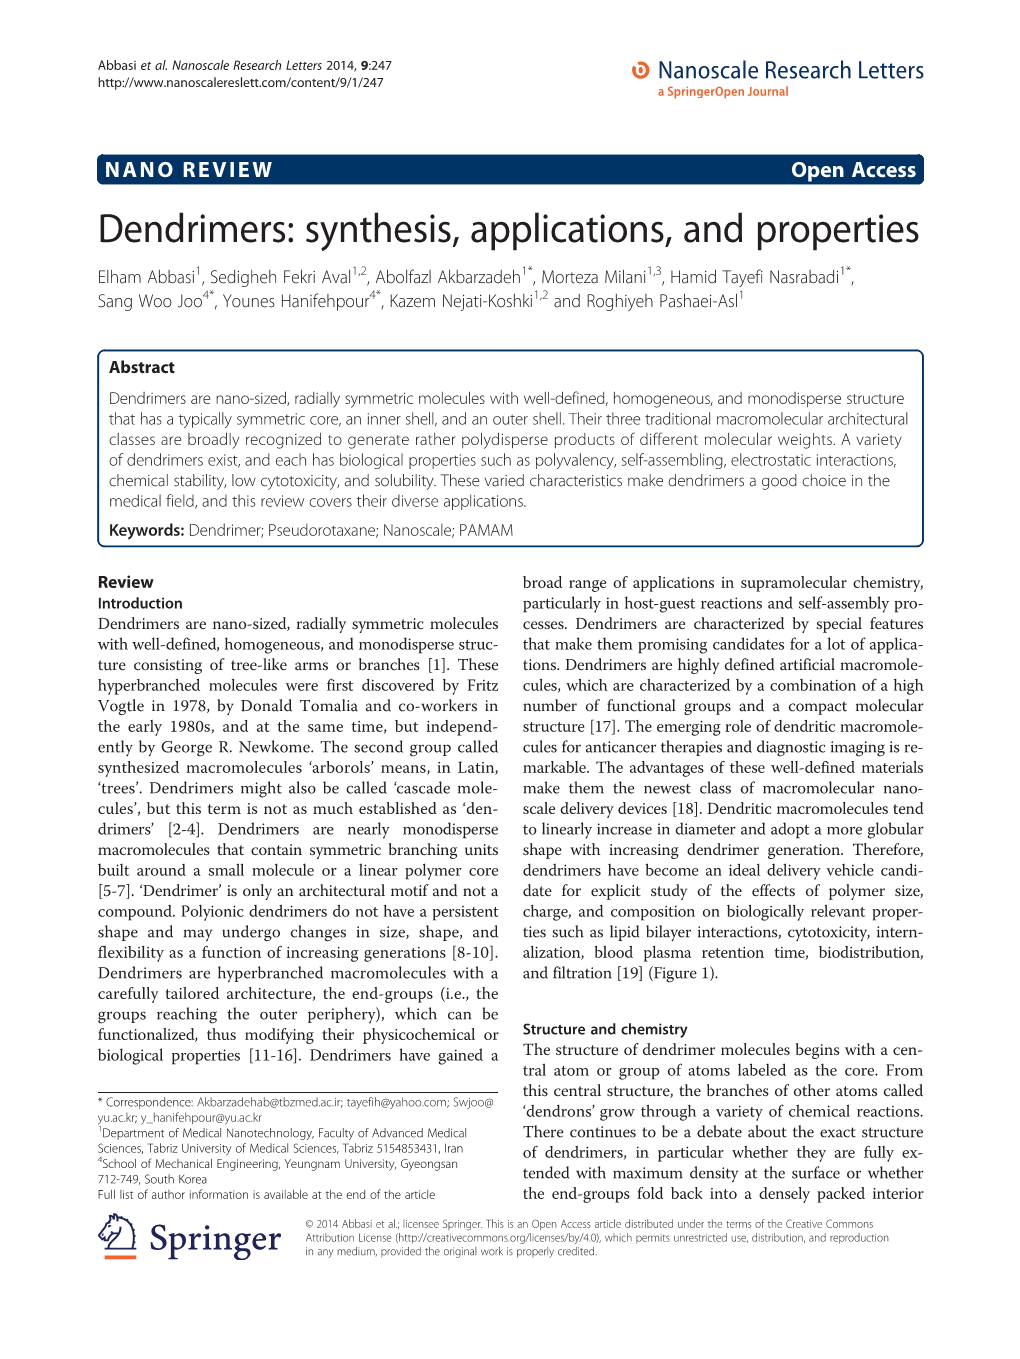 Dendrimers: Synthesis, Applications, and Properties